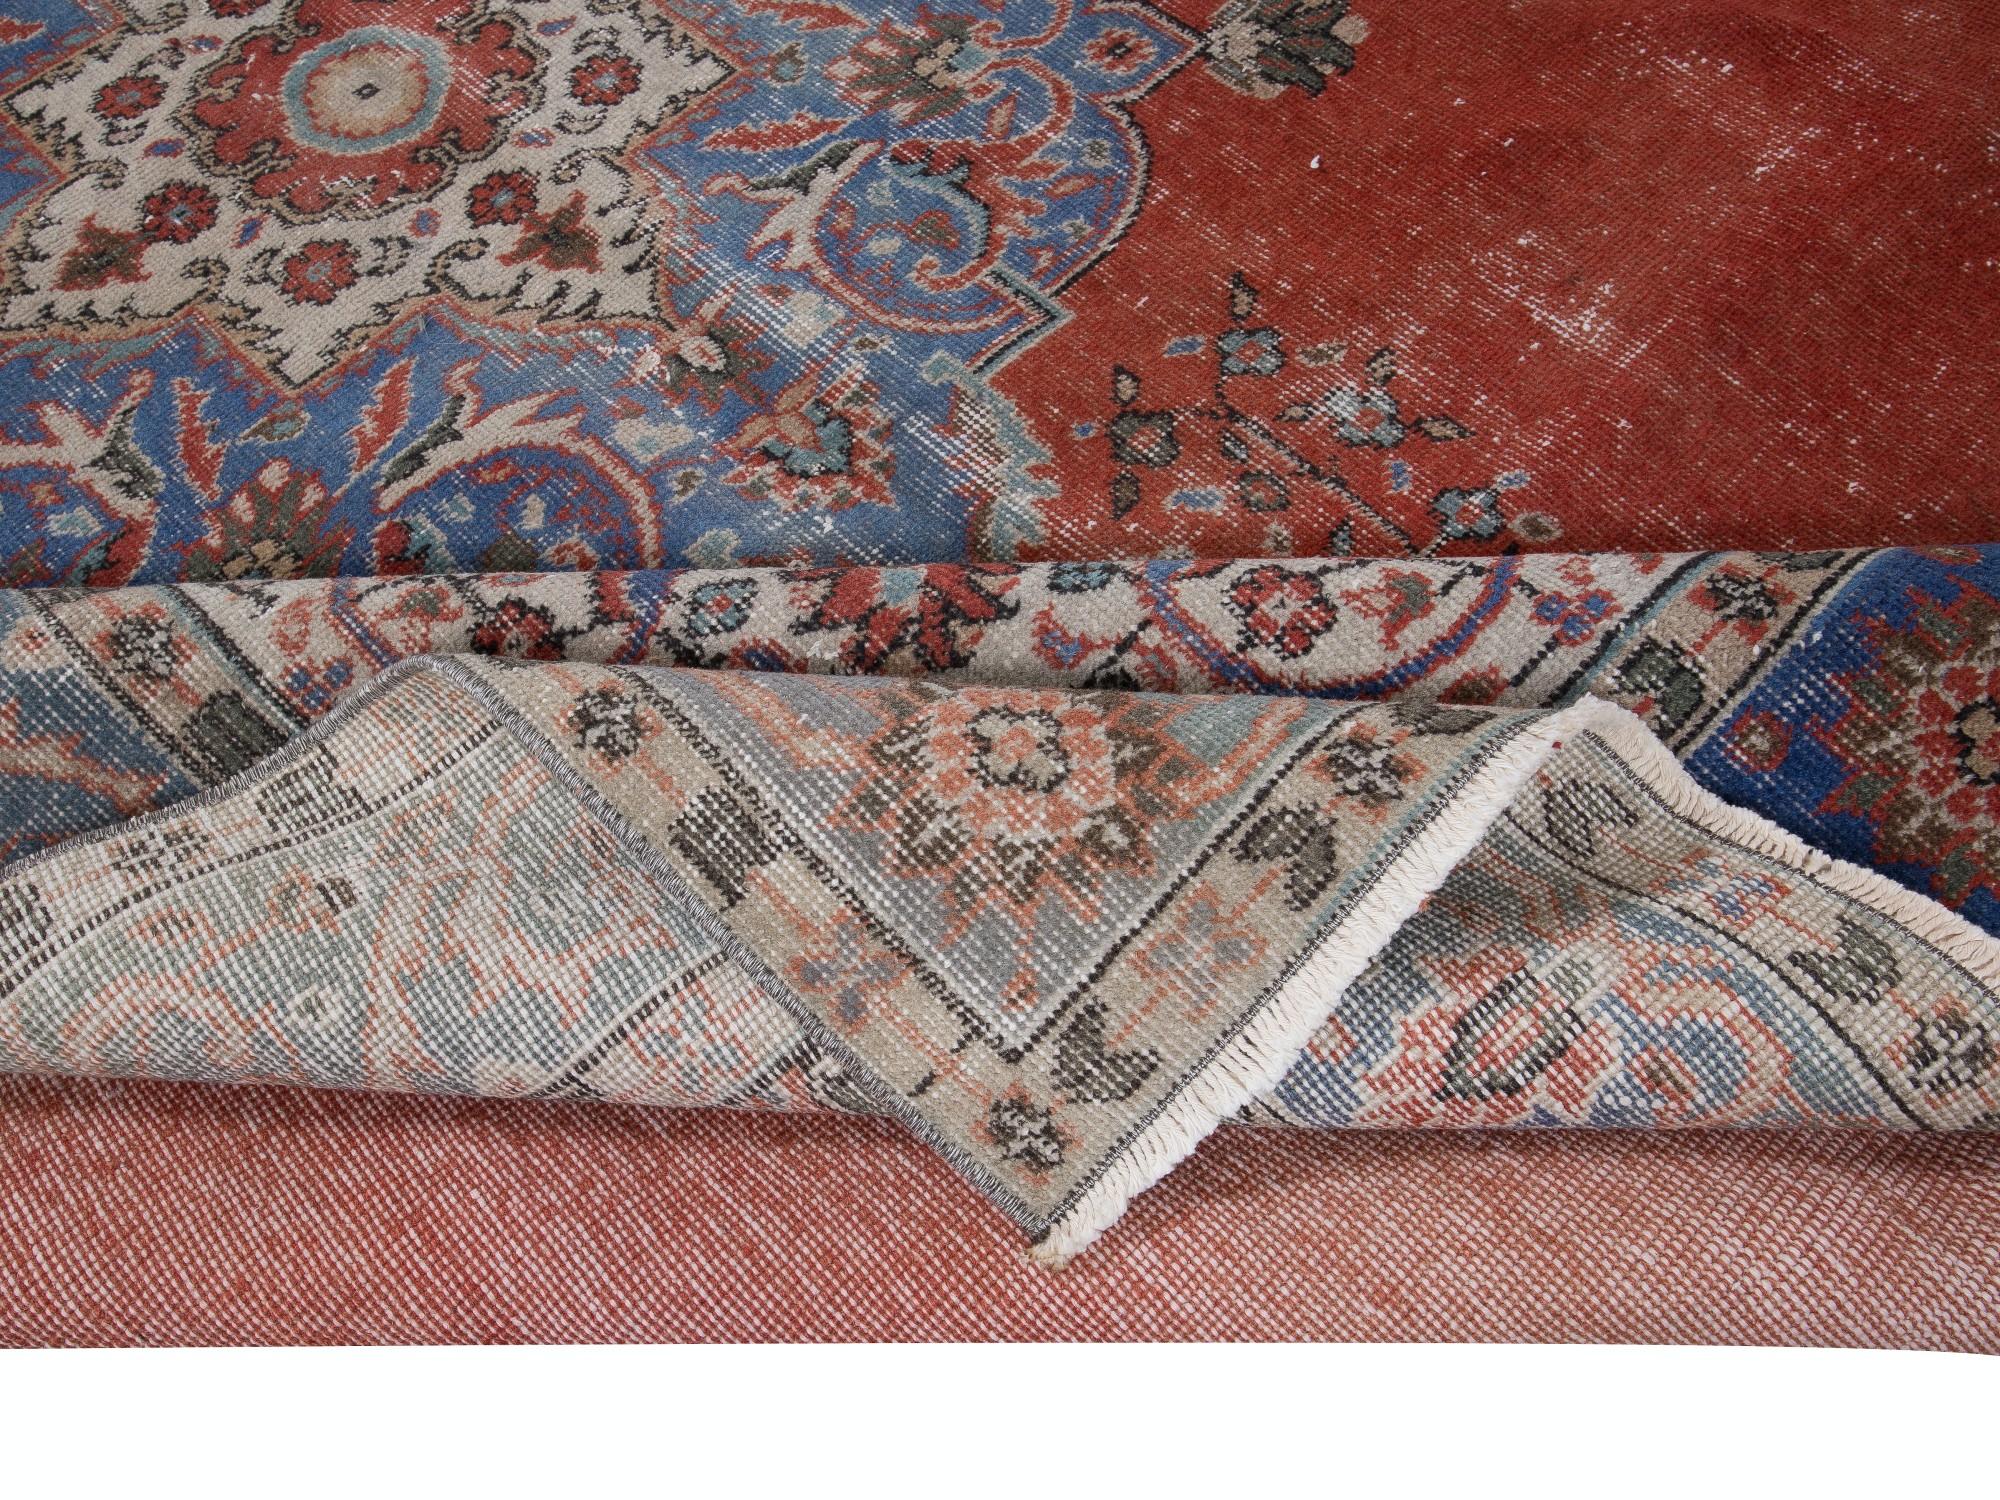 Tribal 6.6x10 Ft One-of-a-kind Vintage Handmade Turkish Rug in Red, Navy Blue & Beige For Sale